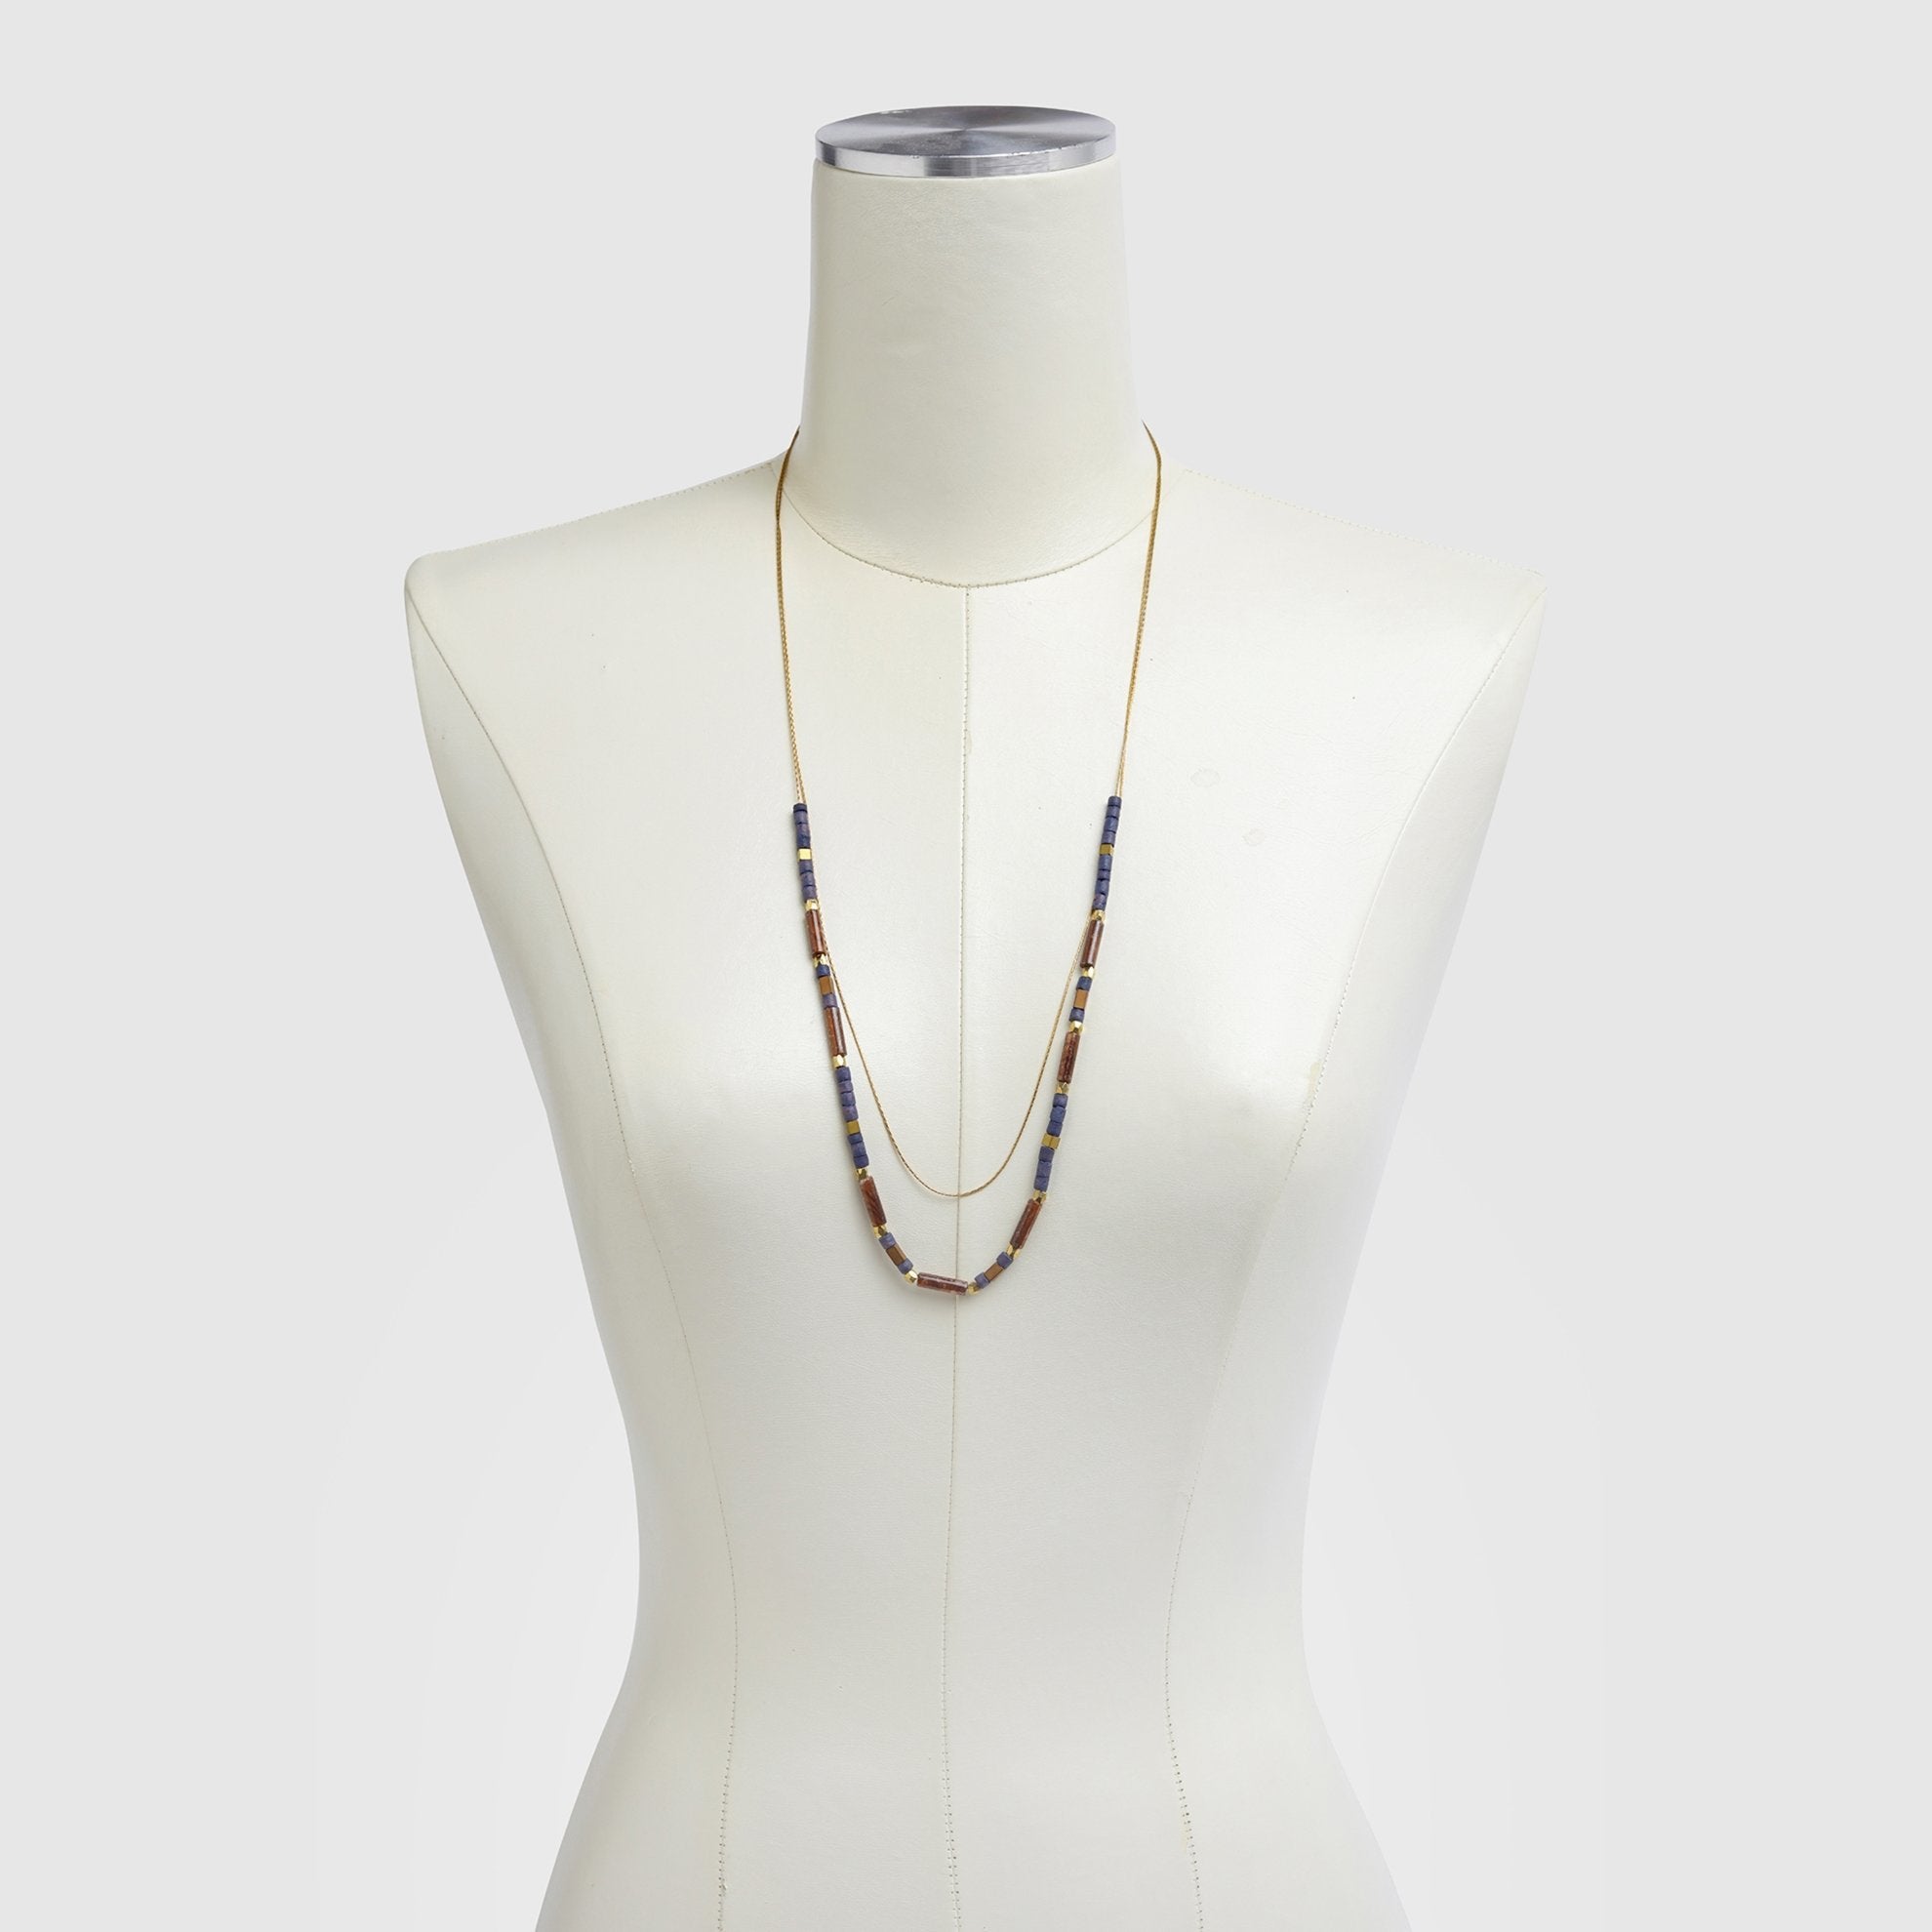 Double Chain Necklace on Dress Form